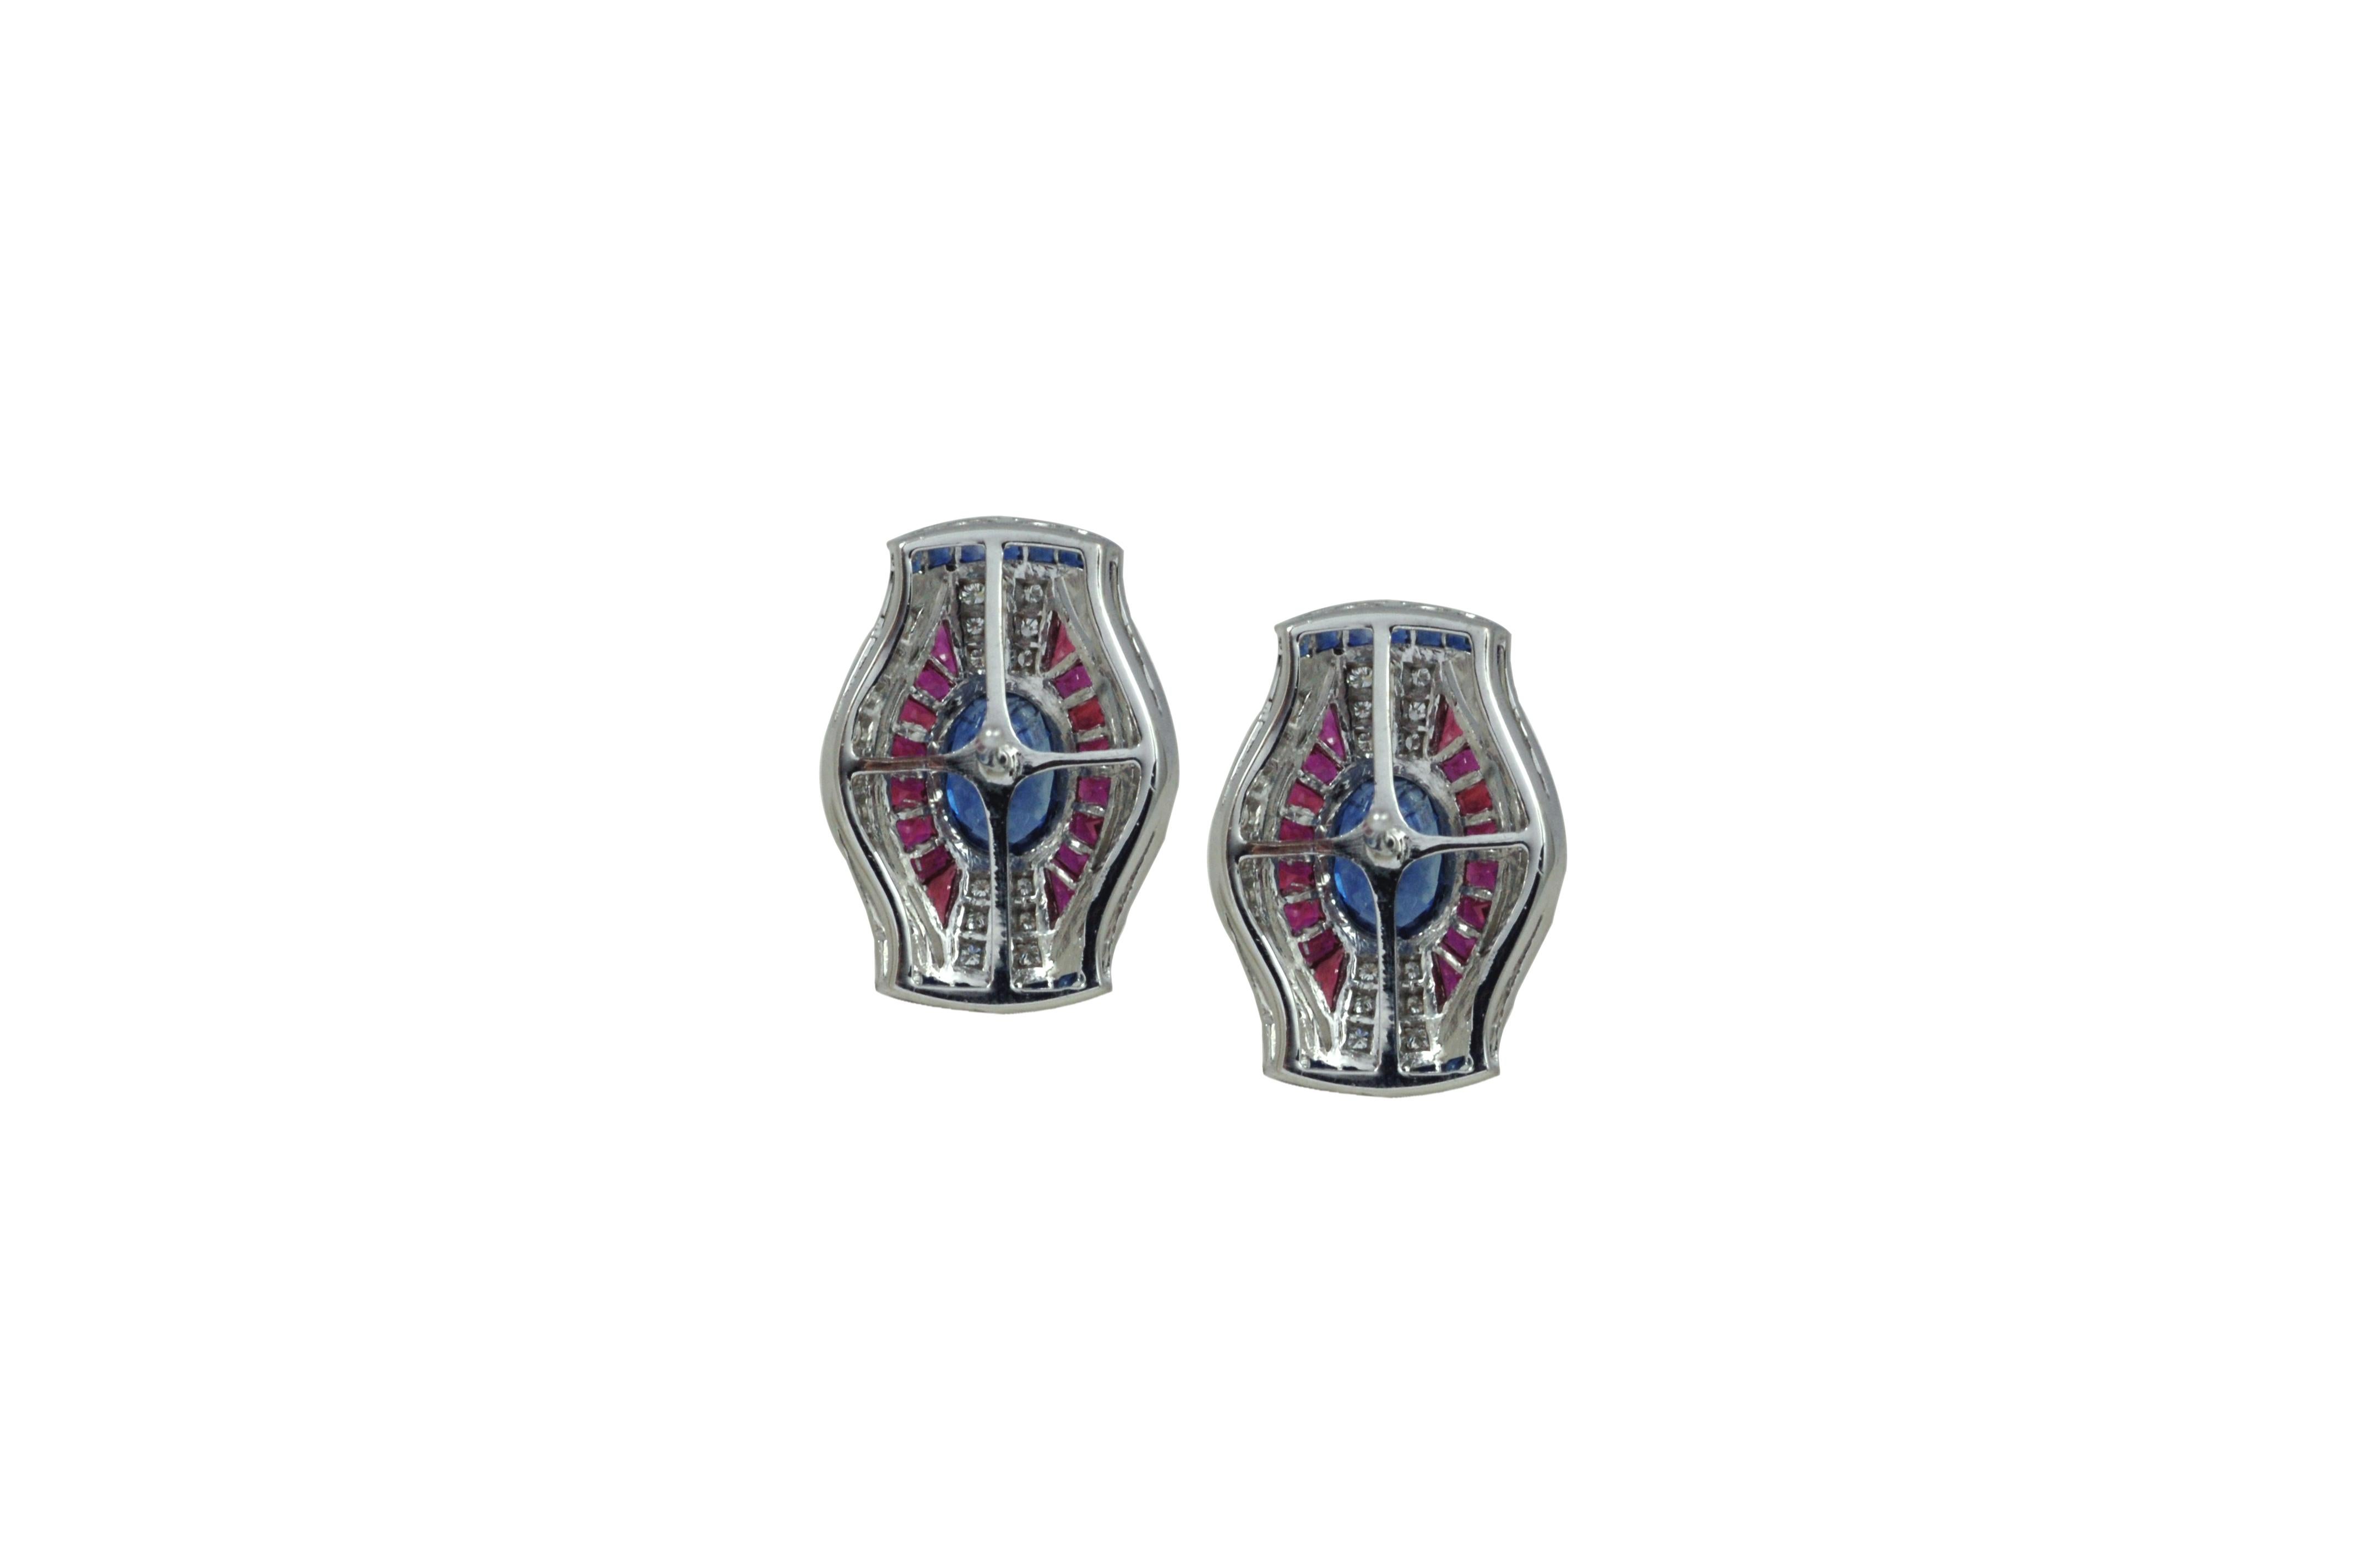 Blue Sapphire 2.68 carats, Blue Sapphire 0.98 ct, Ruby 1.91 carats with Diamond 0.49 carats Earrings in 18 karat White Gold Settings


Width: 1.8 cm
Length: 2.0 cm
Total Weight: 10.32 grams

